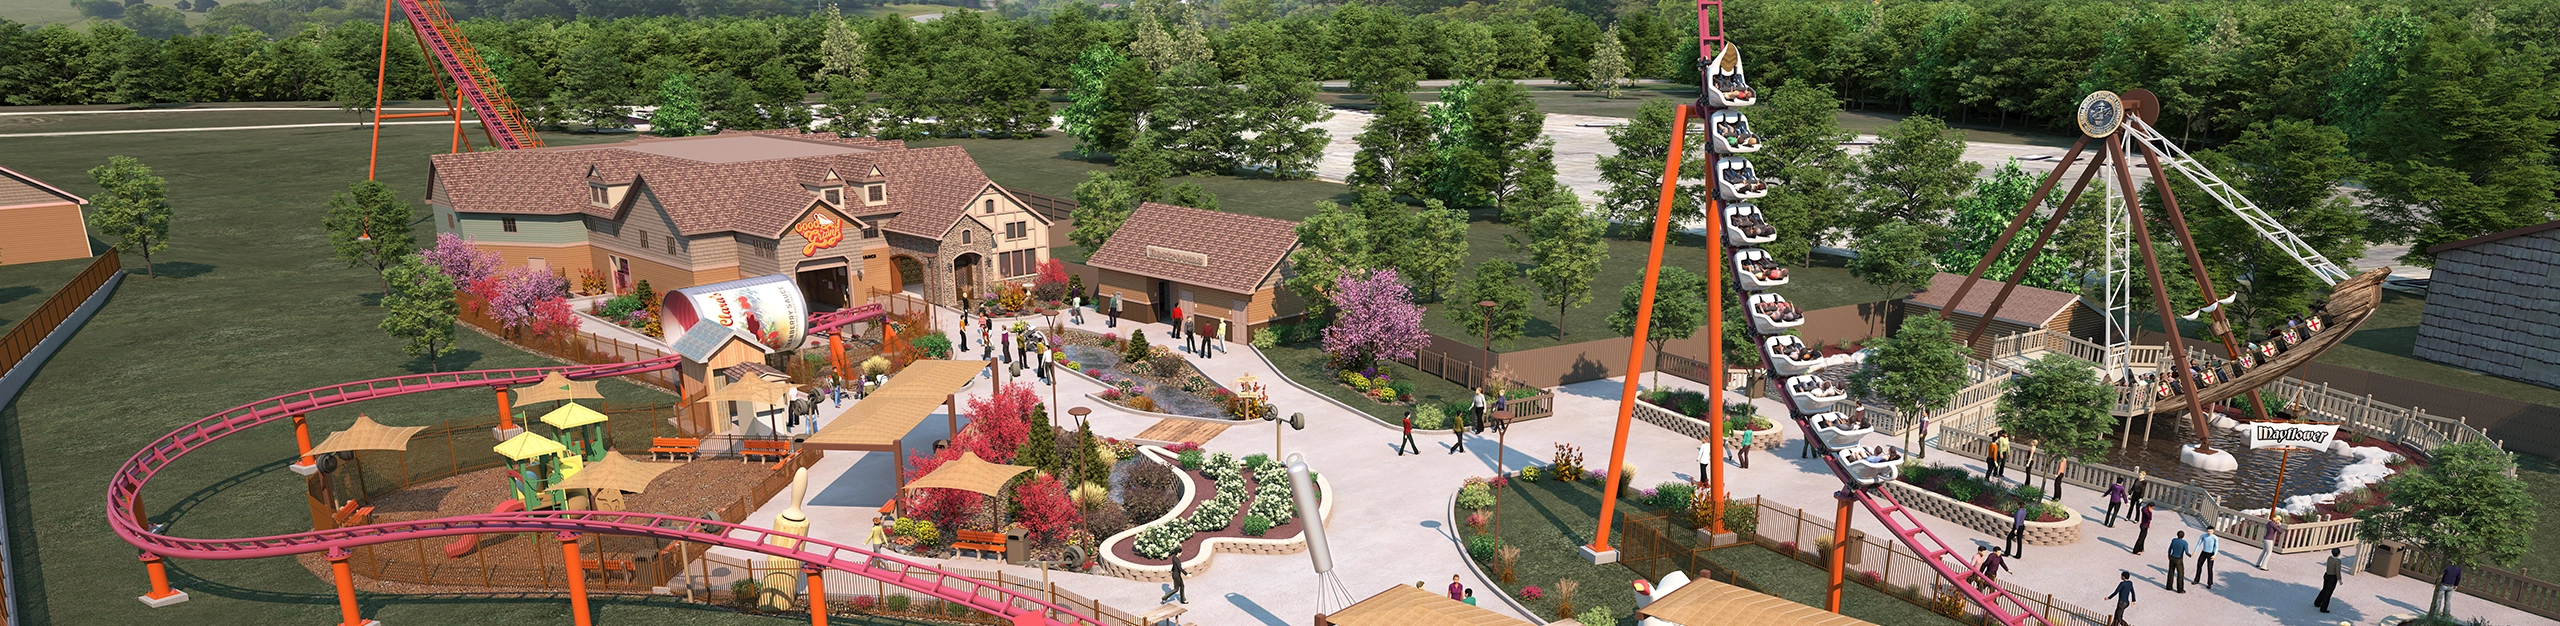 Rendering of Good Gravy and the midways of the Stuffing Springs area of Holiday World.